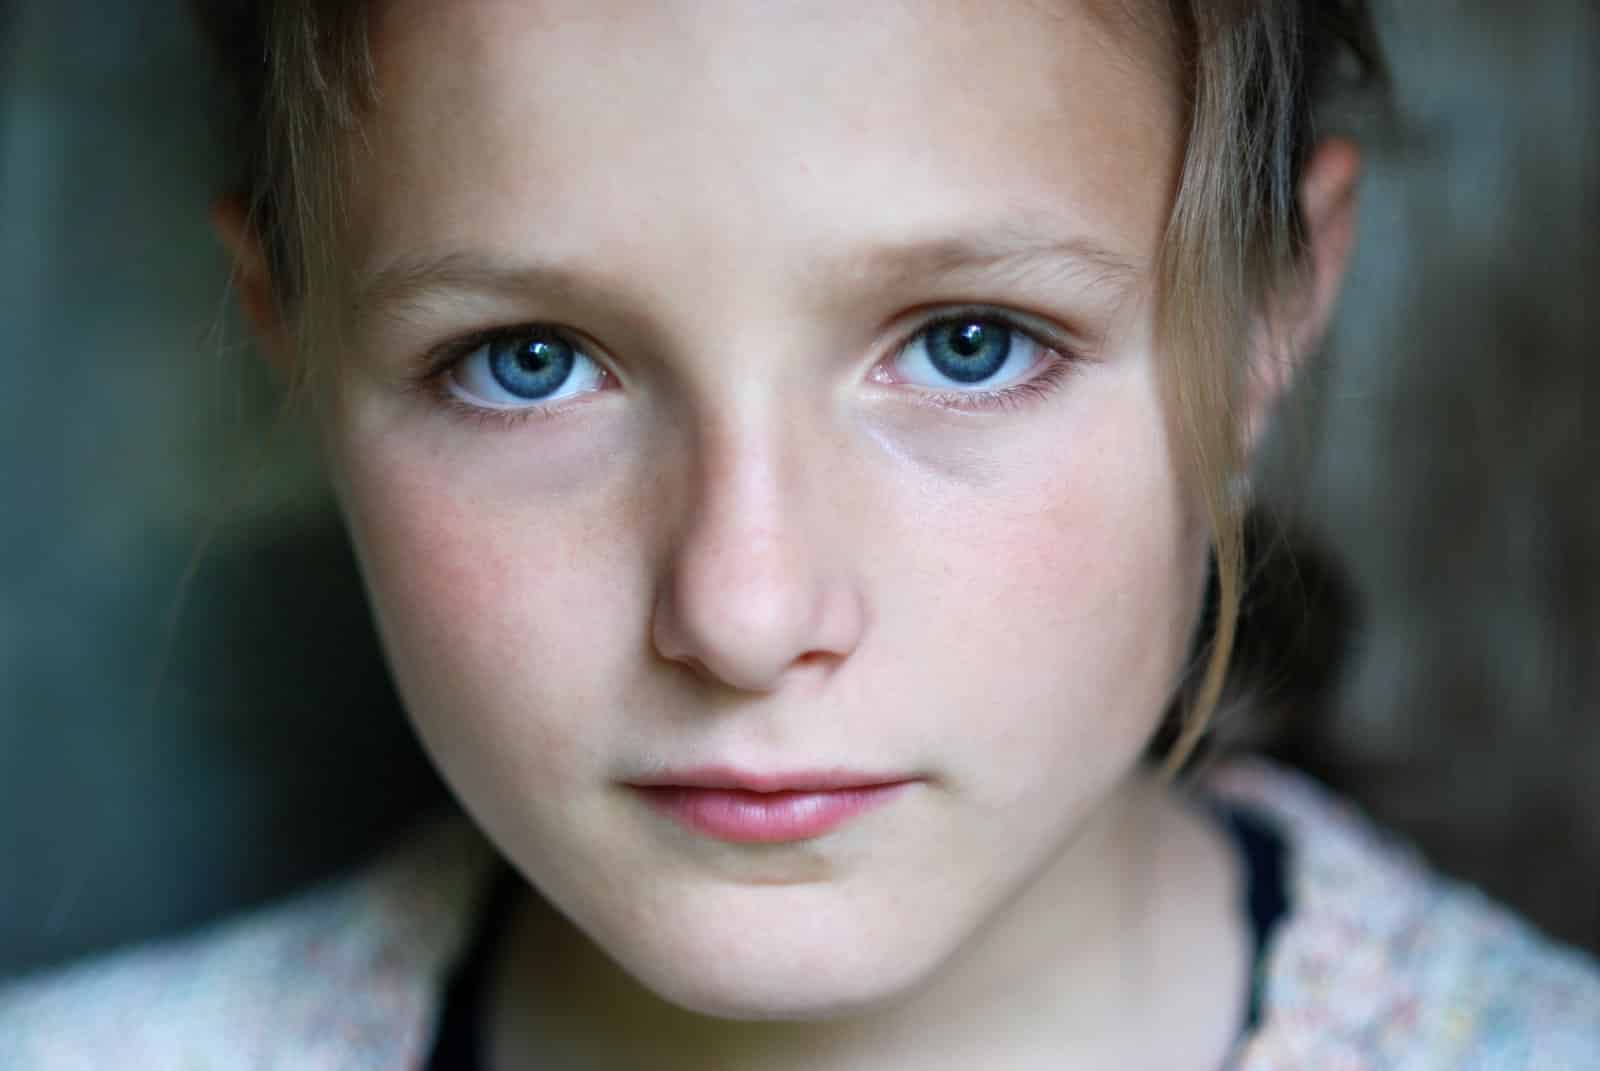 Image Credit: Shutterstock / Ground Picture <p><span>At the beginning of the study, when the eleven-year-olds were asked if they wished to be the opposite gender, only about eleven percent of children showed signs of gender non-contentedness.</span></p>